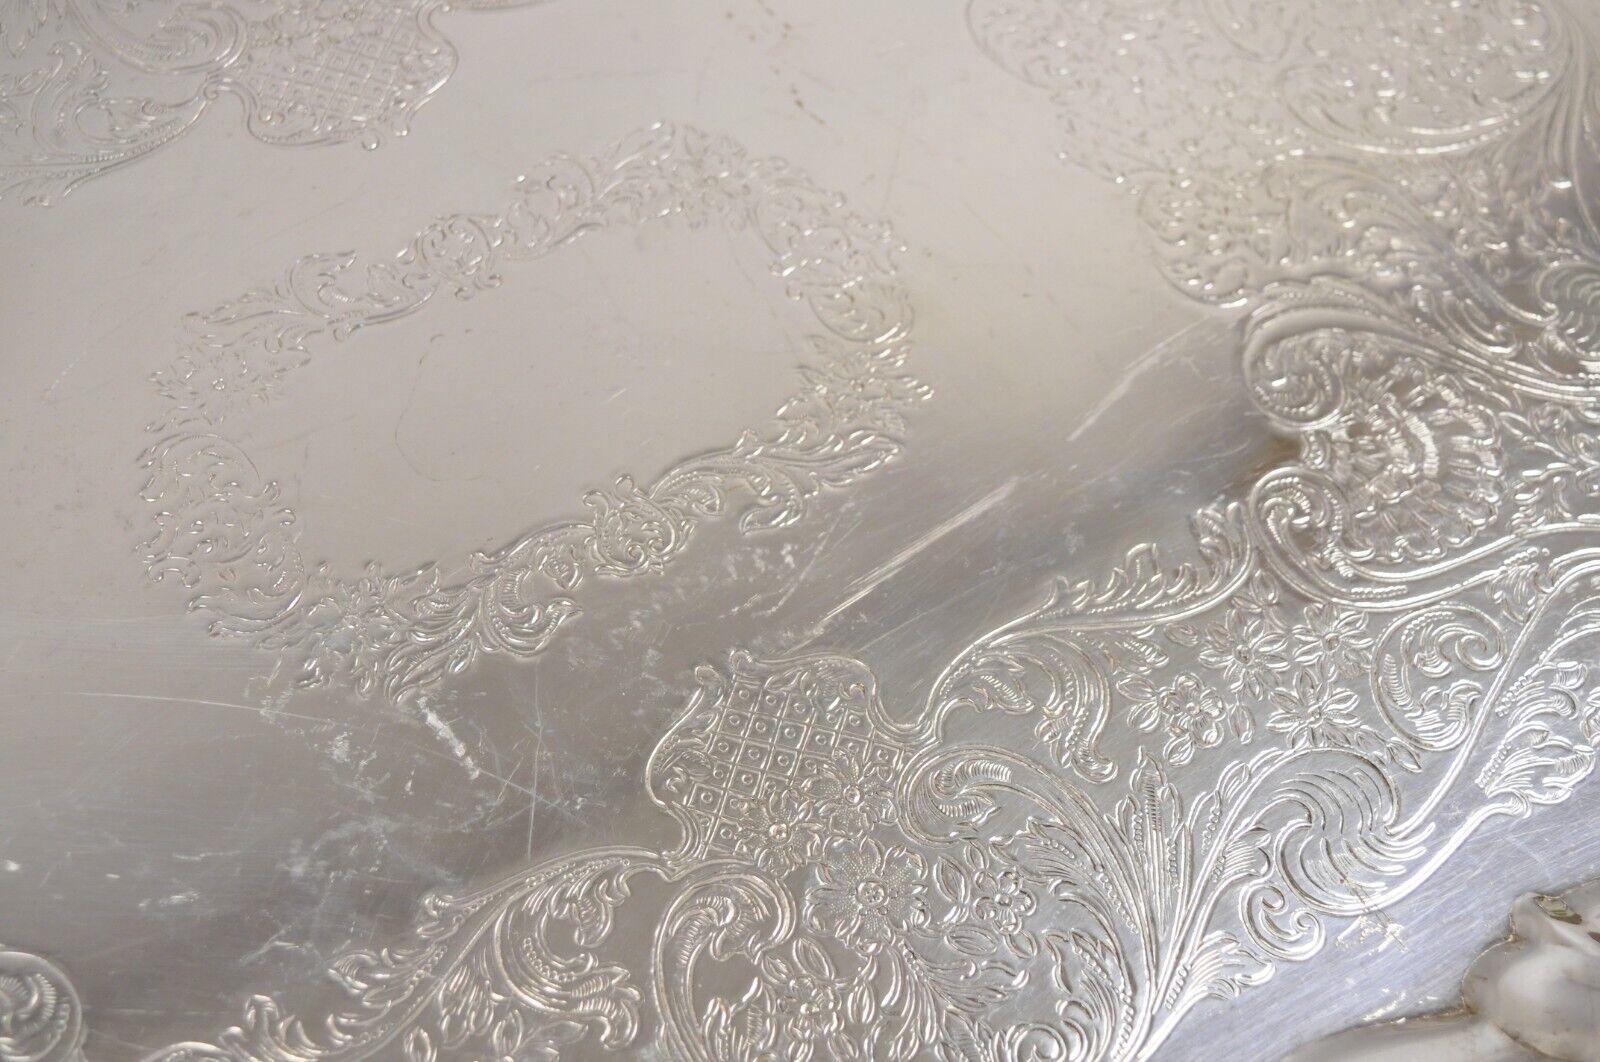 20th Century Vintage Sheridan Victorian Silver Plated Large Twin Handle Serving Platter Tray